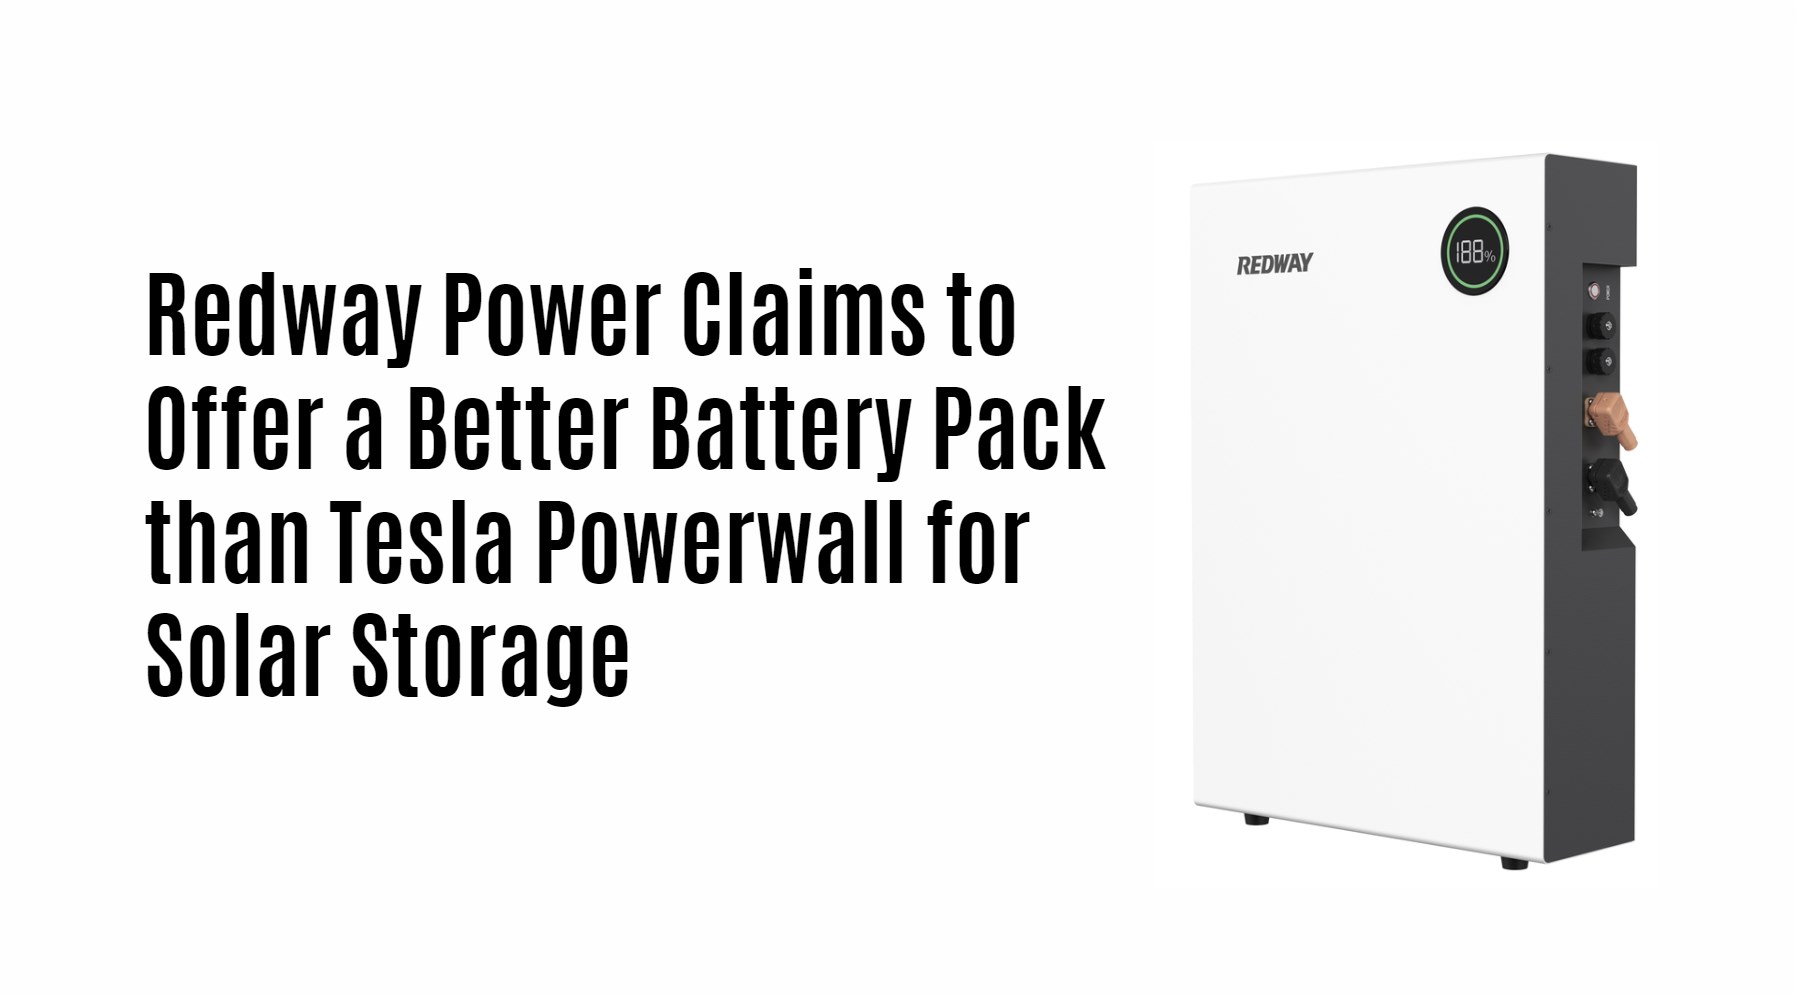 Redway Power Claims to Offer a Better Battery Pack than Tesla Powerwall for Solar Storage